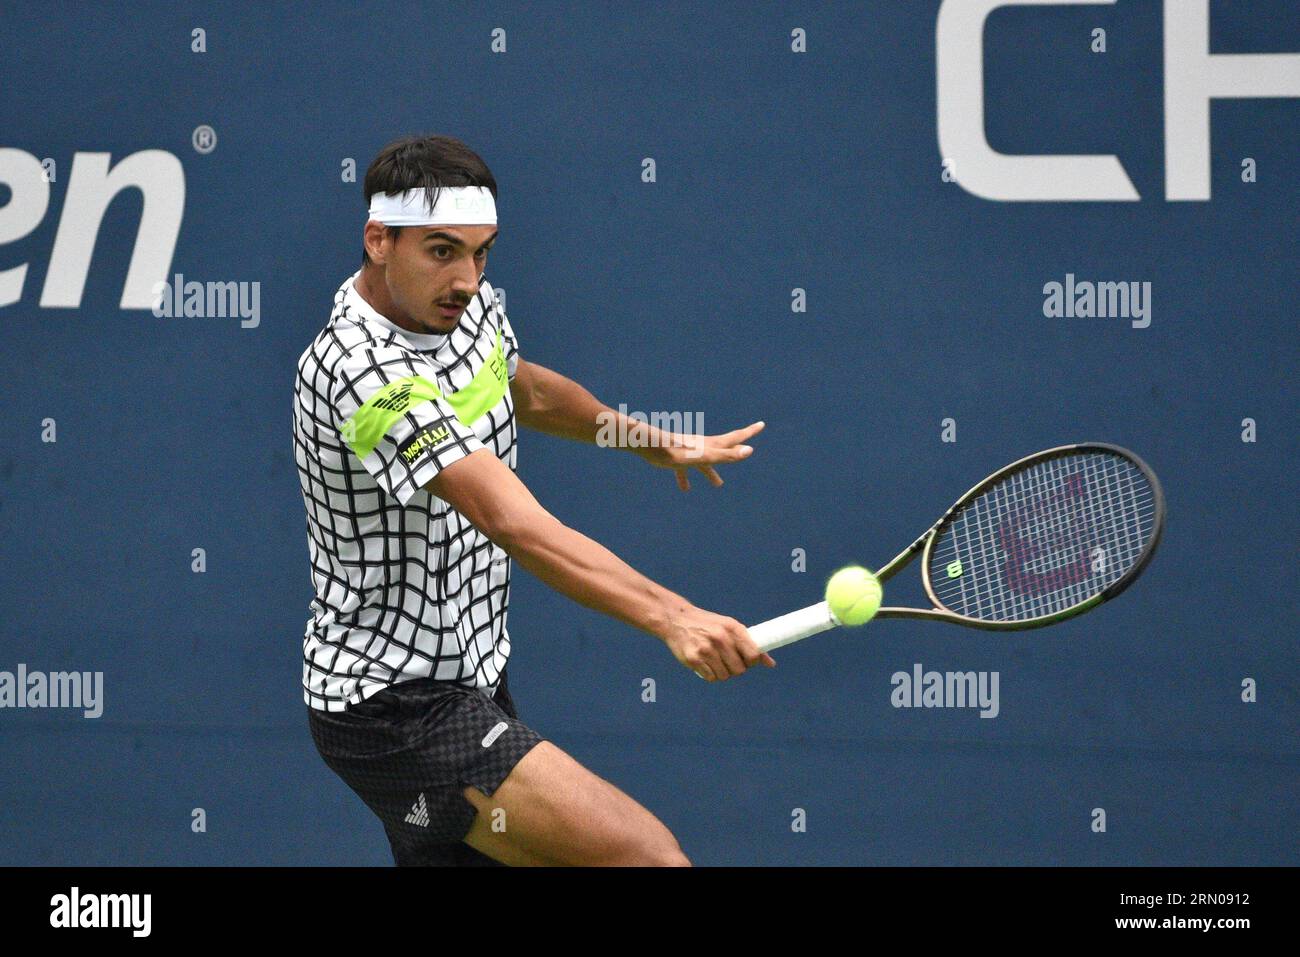 Lorenzo Sonego in action during a mens singles match at the 2023 US Open, Tuesday, Aug